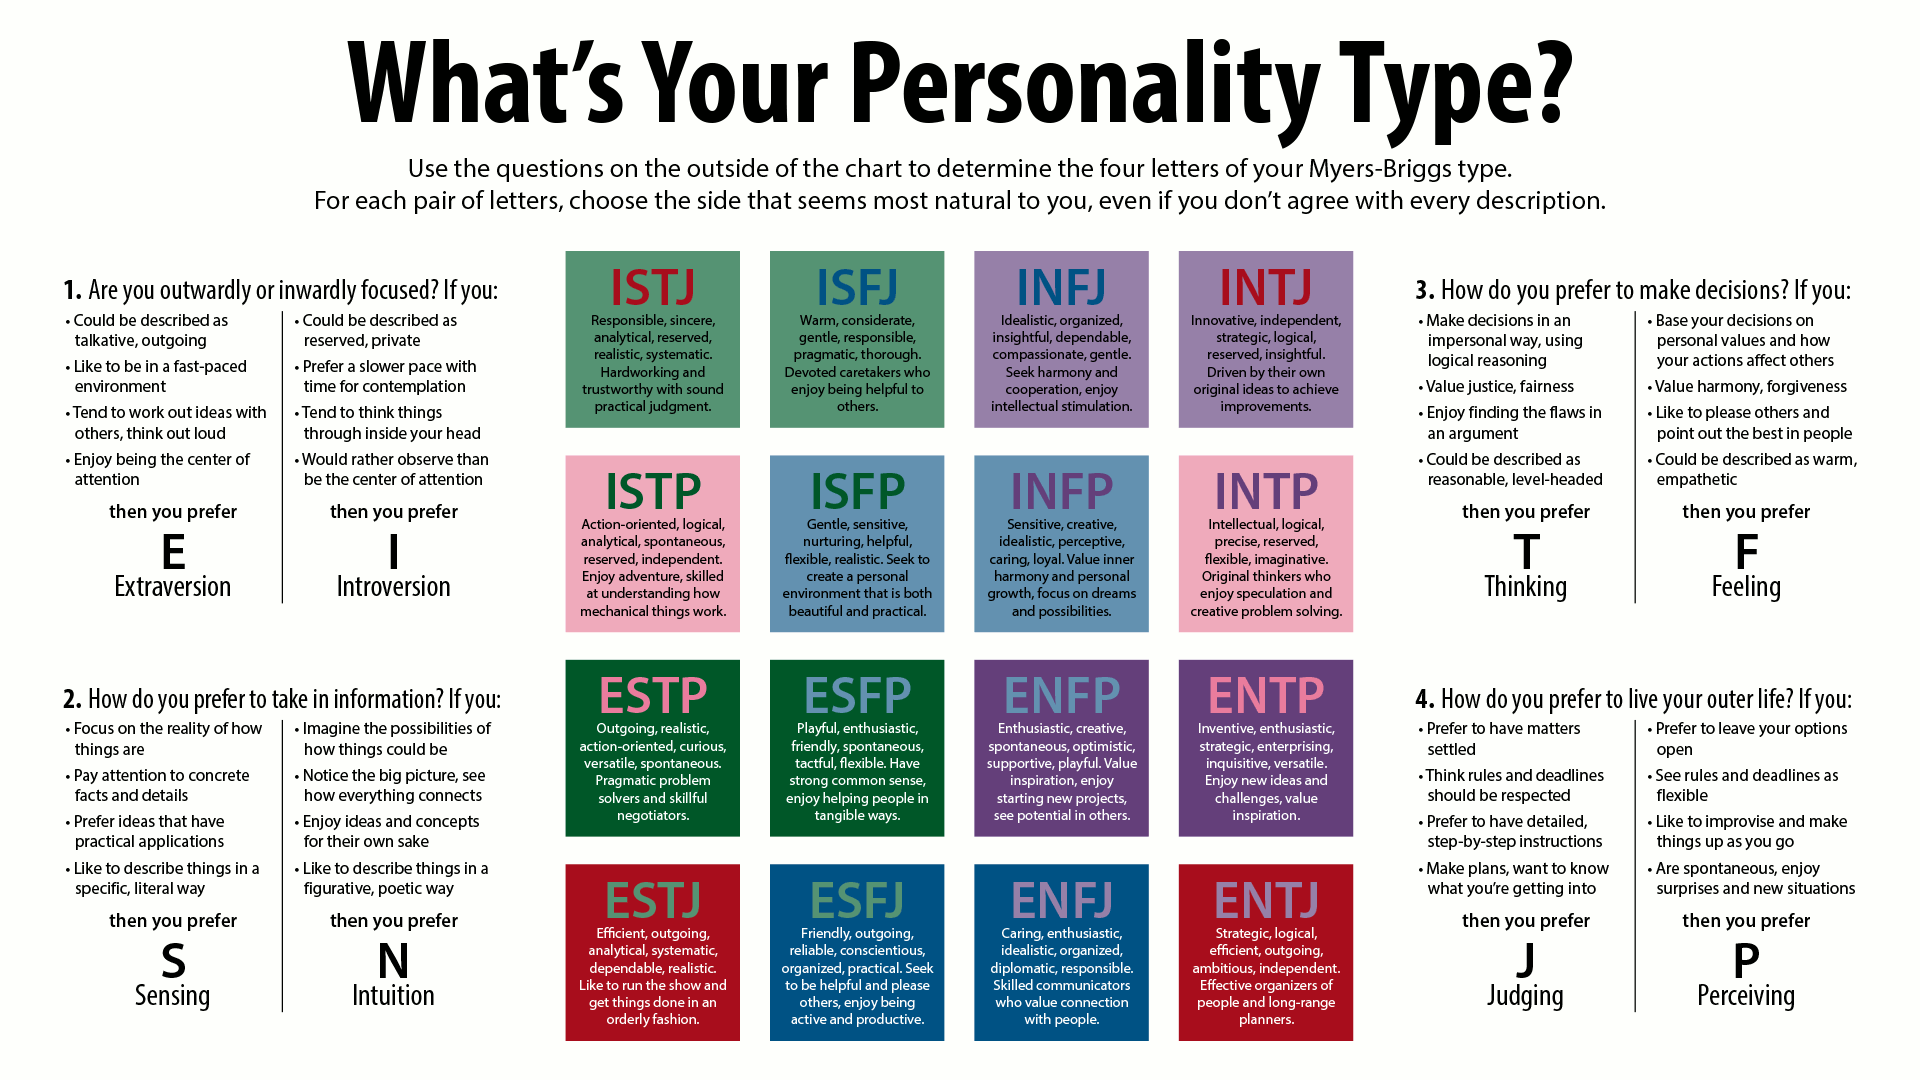 MBTI, or Meyers-Briggs Type Indicator, is a widely recognized personality classification system to quickly filter different people into one of 16 base personae.